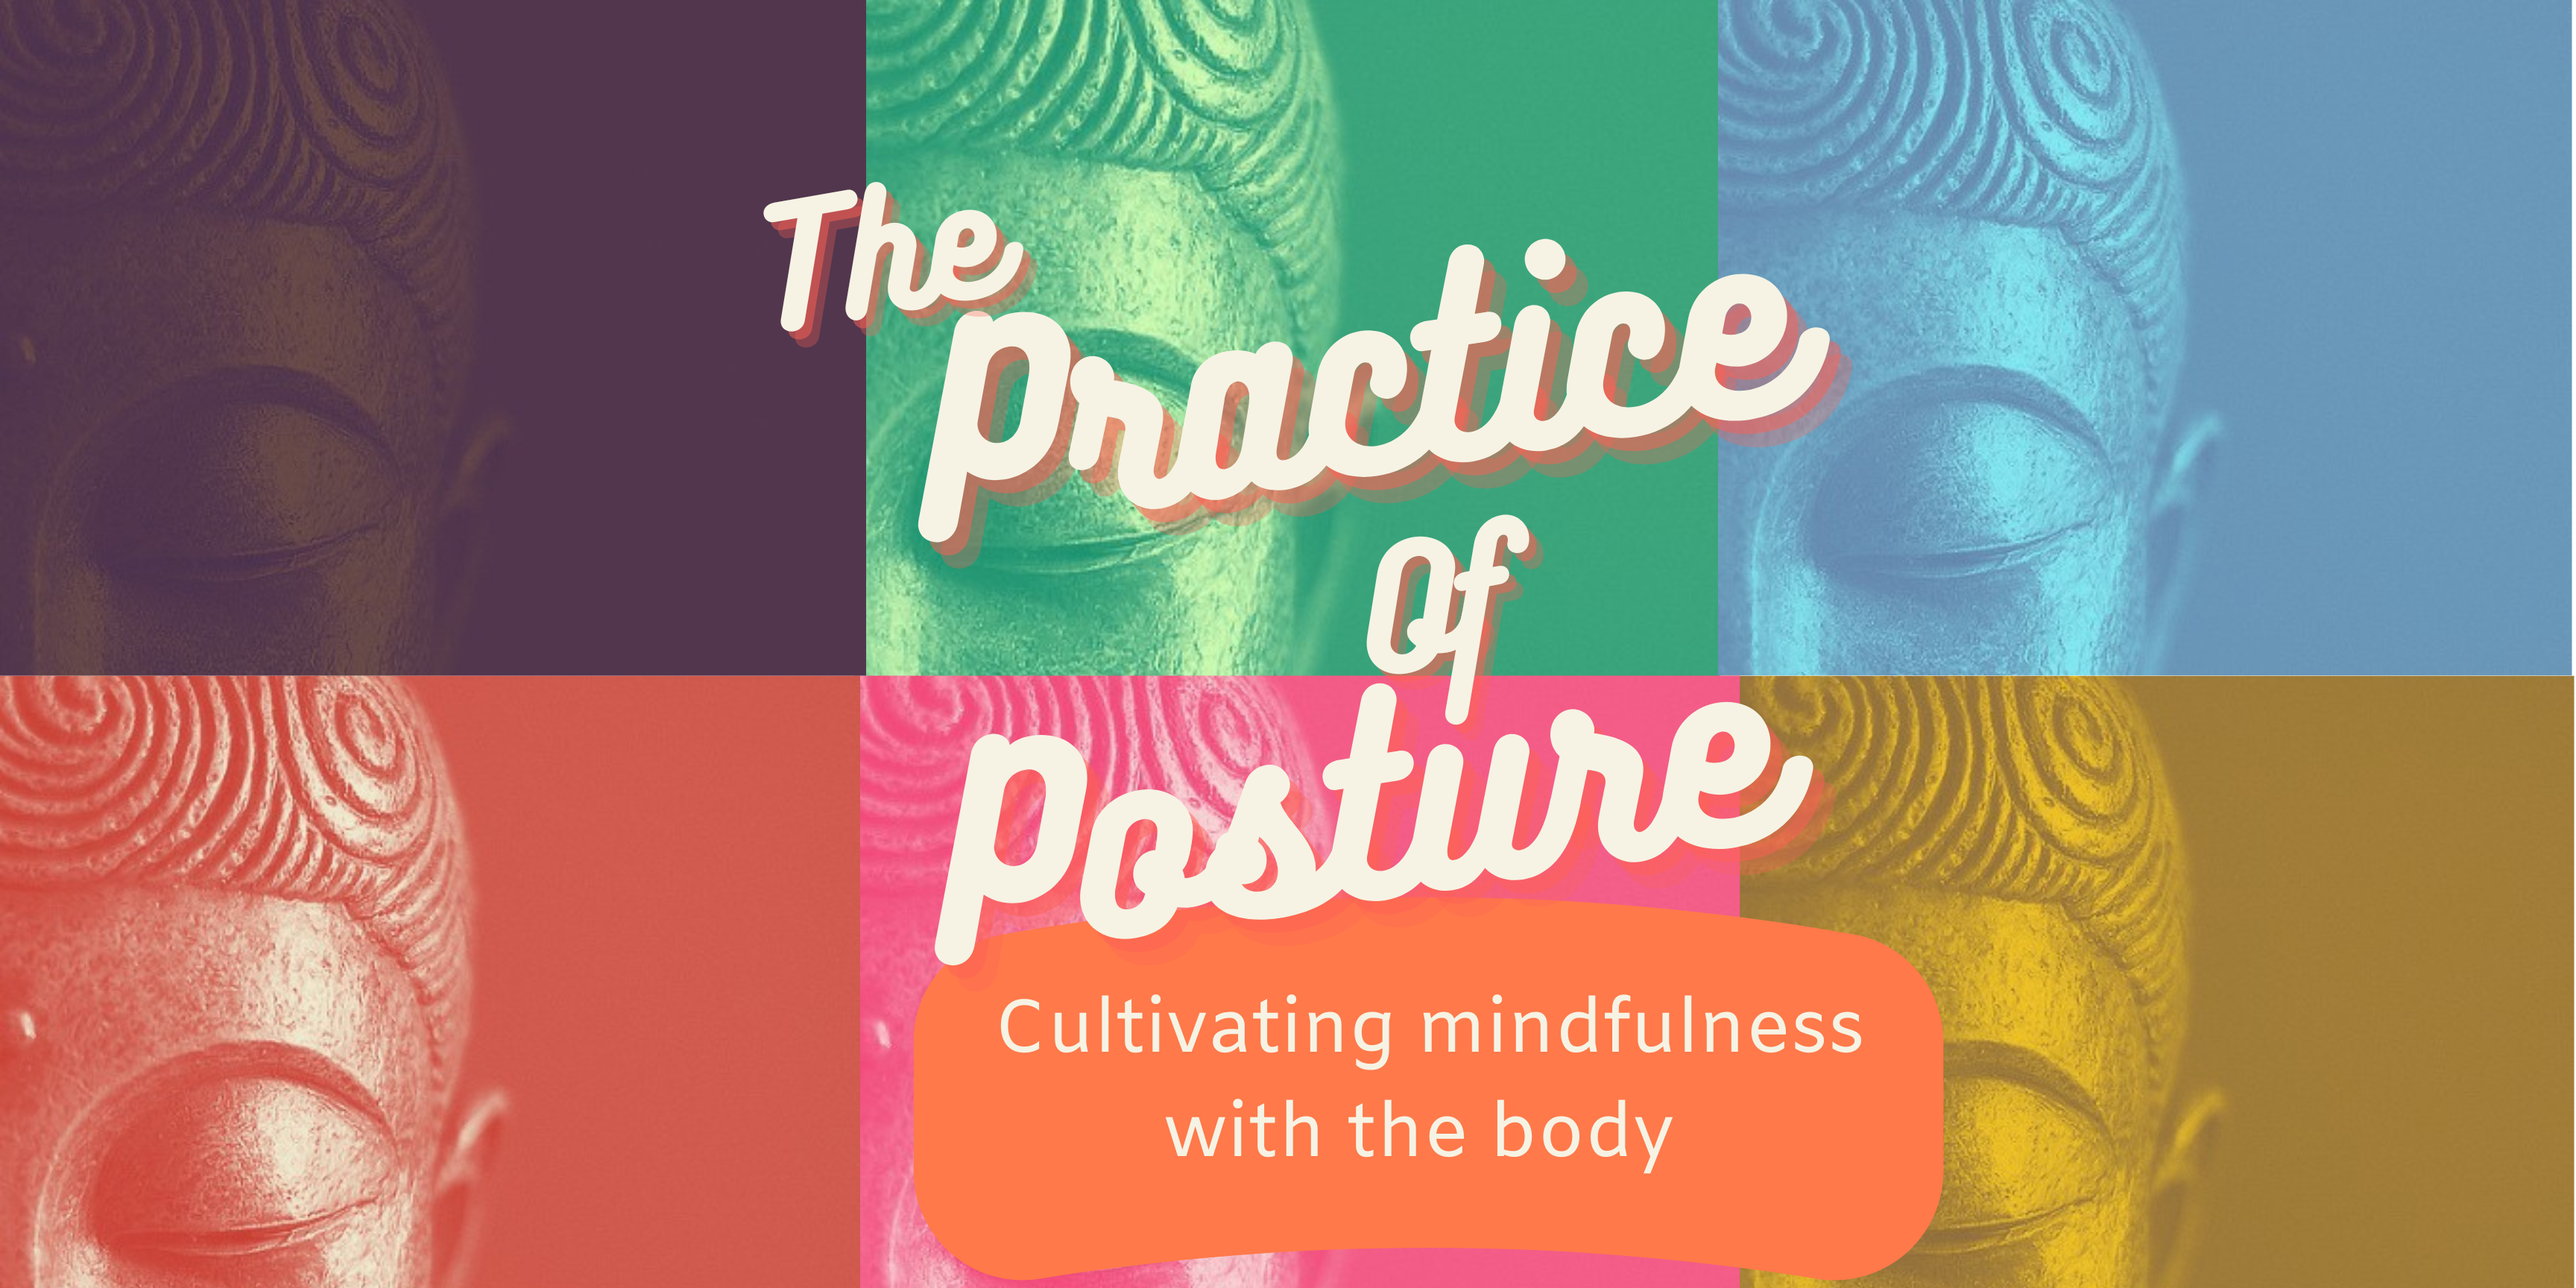 Multi colored six images of carved Buddha figure. Text overlay reads large white font "The Practice of Posture" orange shape with white text reads " Cultivating mindfulness with the body"